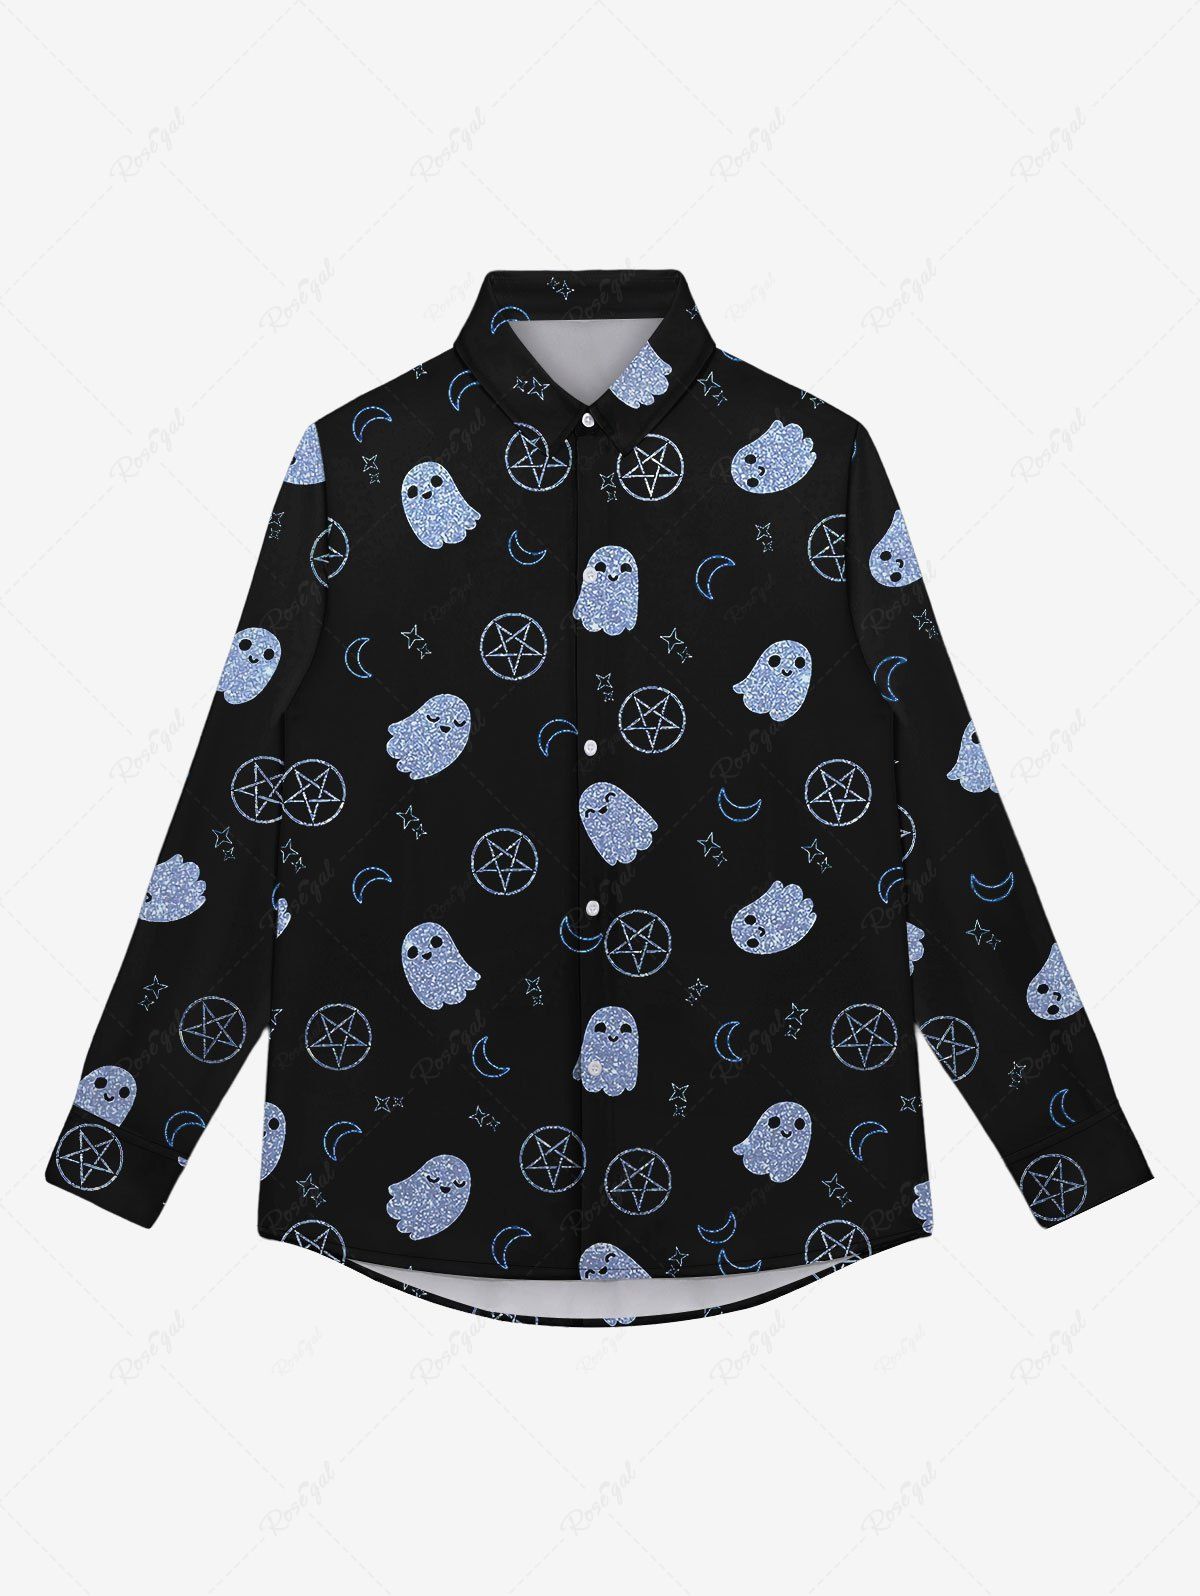 Sale Gothic Turn-down Collar Cute Ghost Moon Star Printed Buttons Shirt For Men  